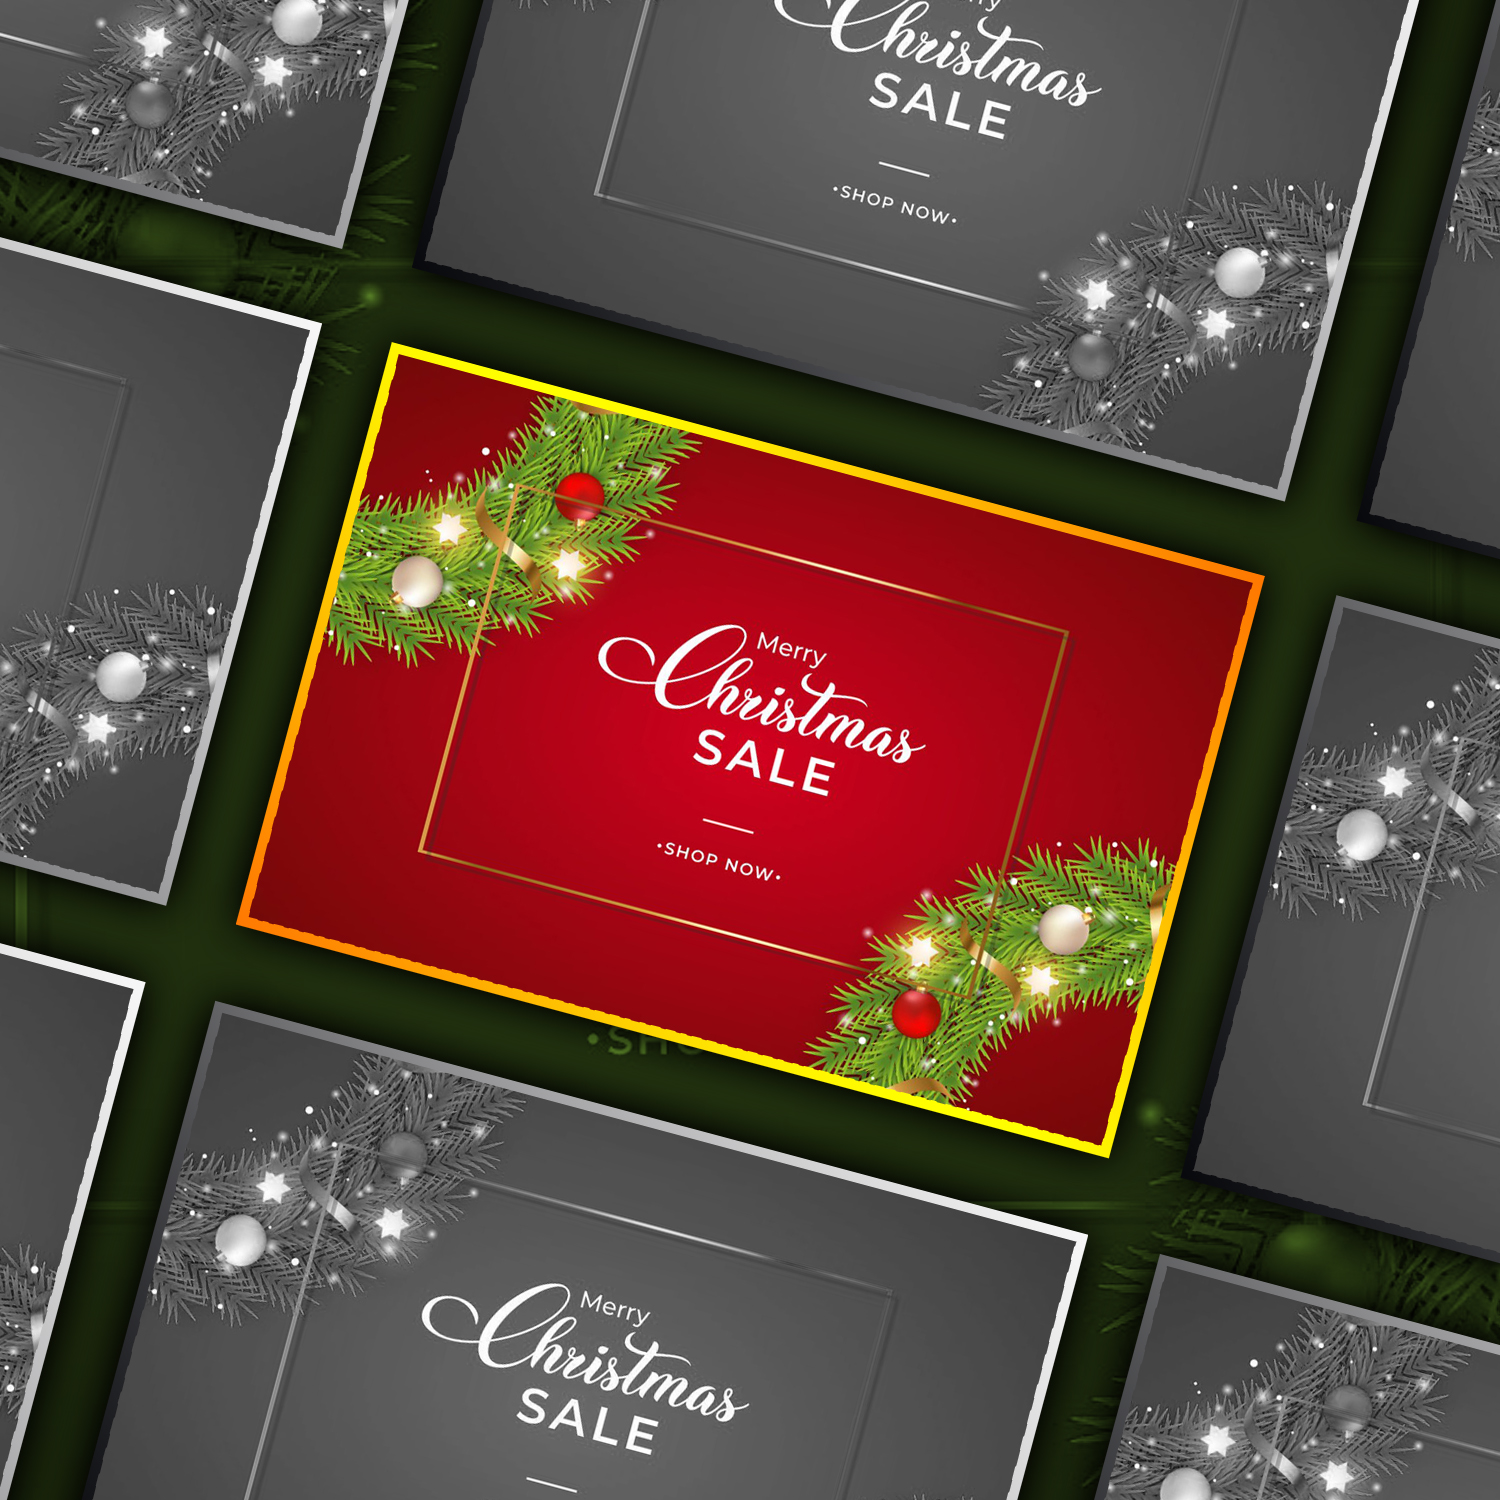 Images with christmas sales banner green wreath.